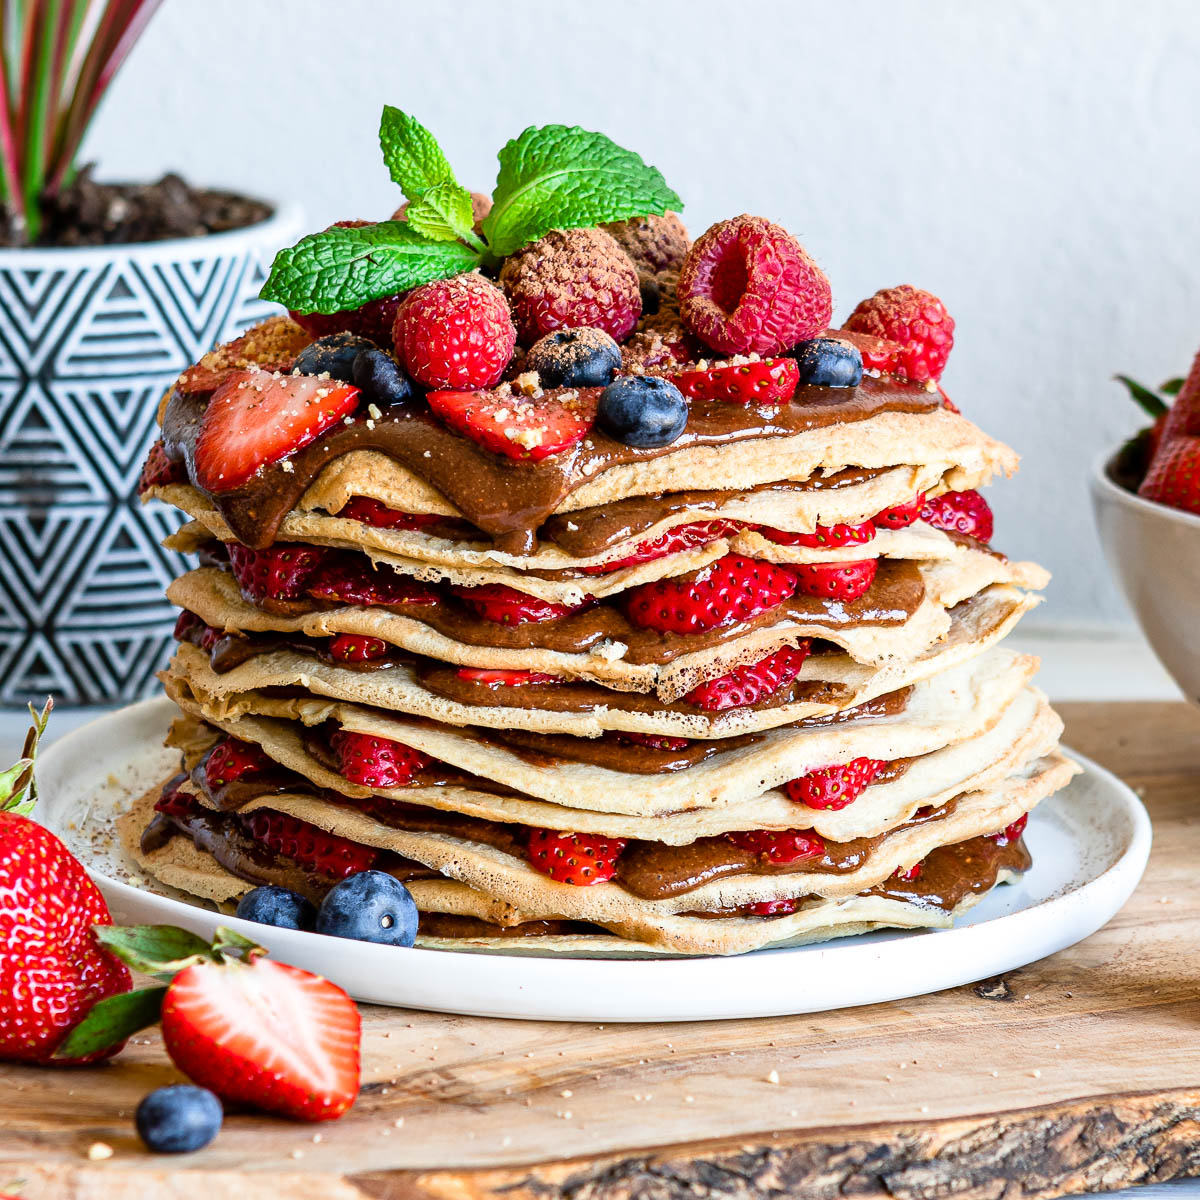 stack of crepes filled with chocolate hazelnut spread, raspberries and strawberries.